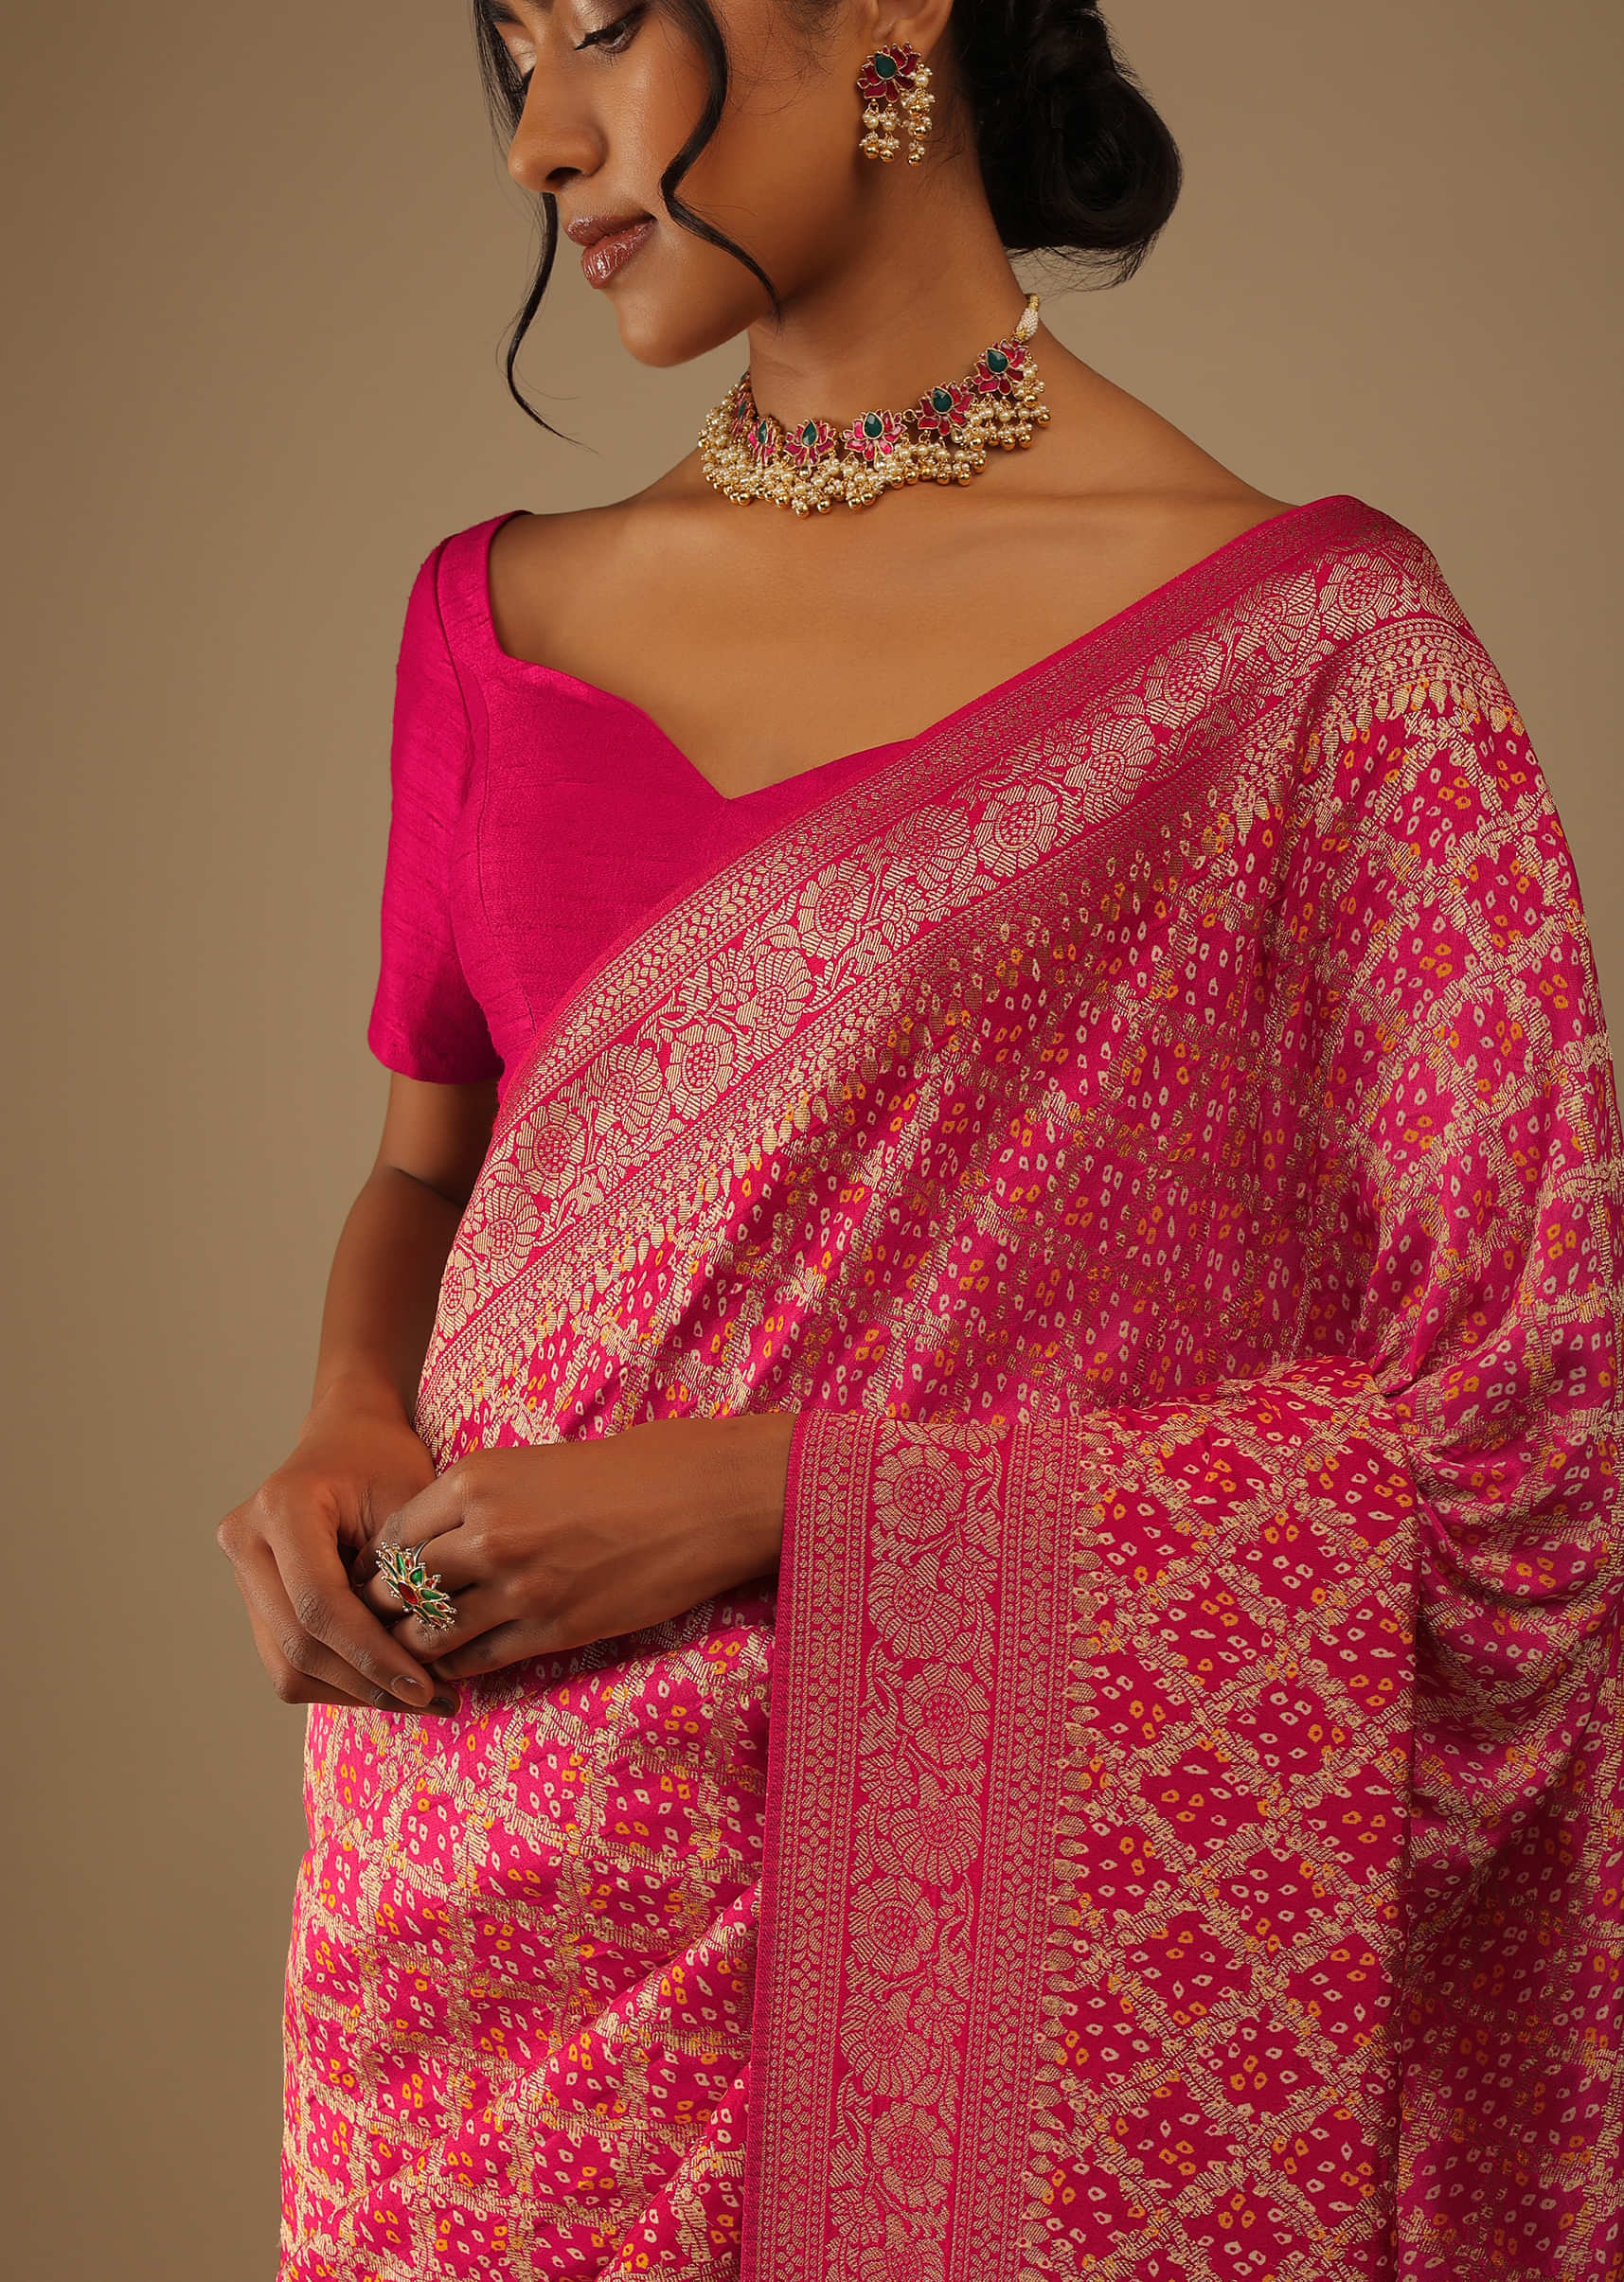 Pink And Red Saree In Digital Bandhani Print,Crafted In Brocade Silk With Zari Embroidery